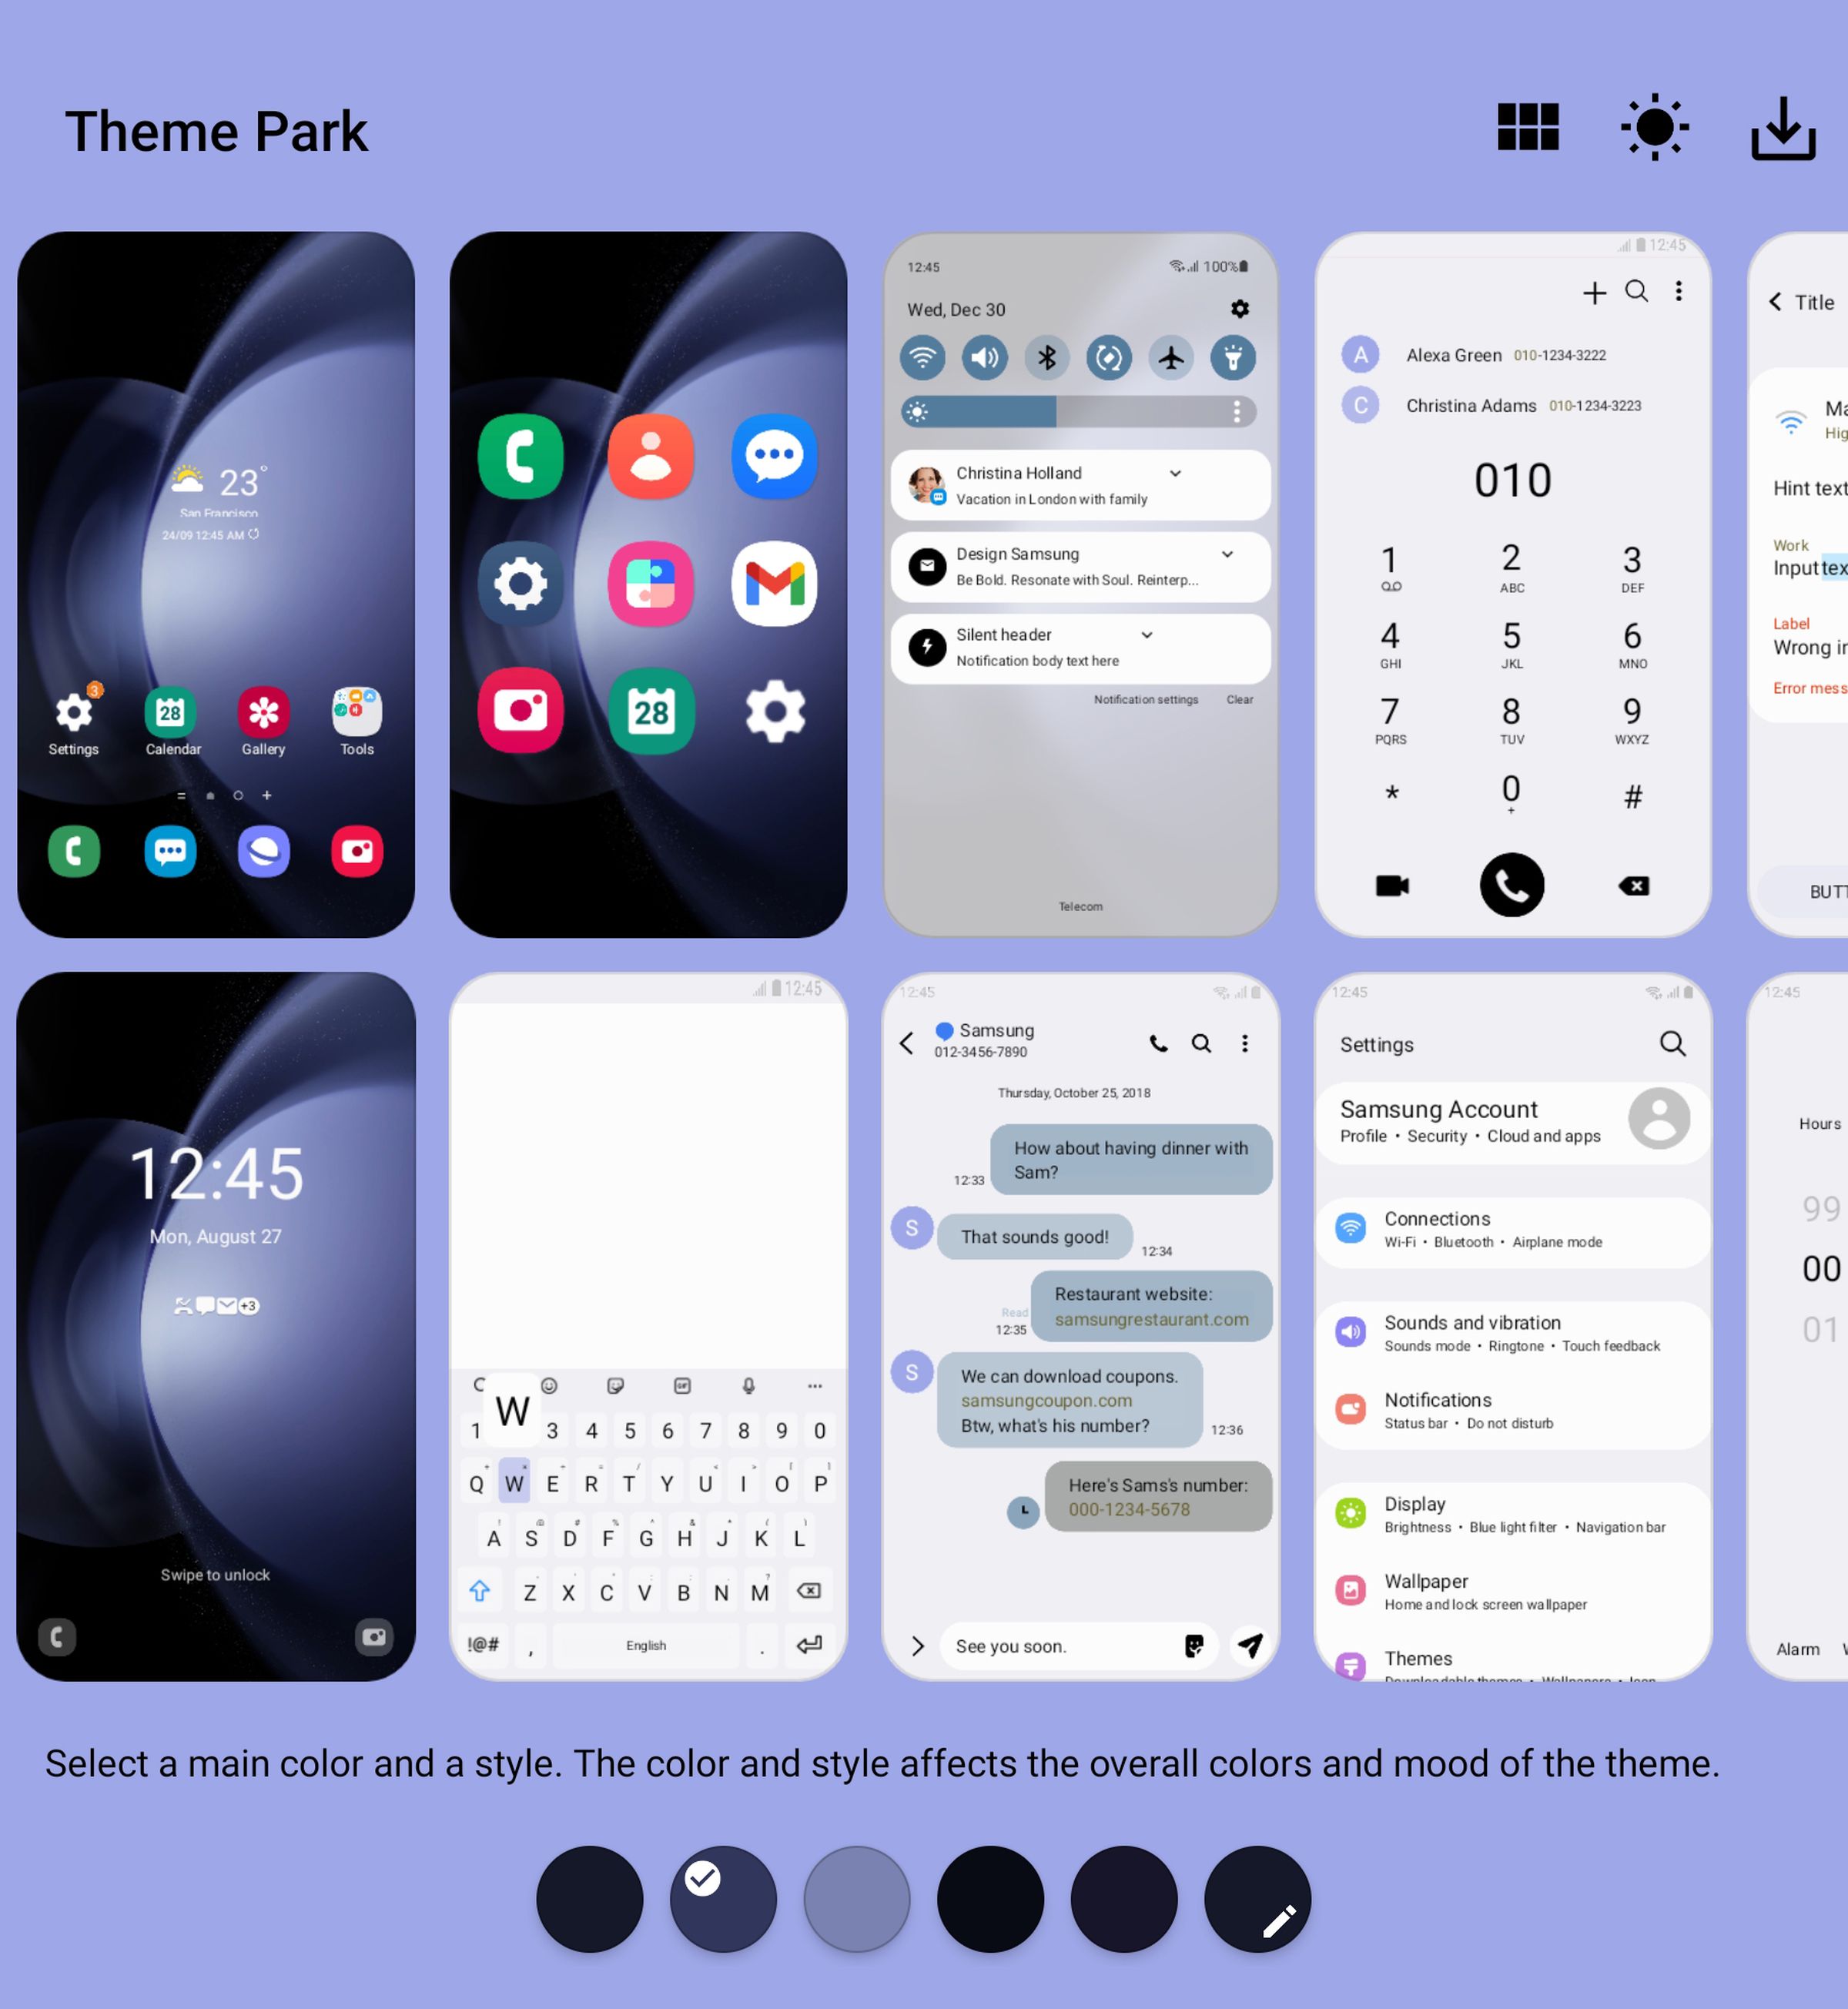 A screen full of different sample themes for a Galaxy phone.